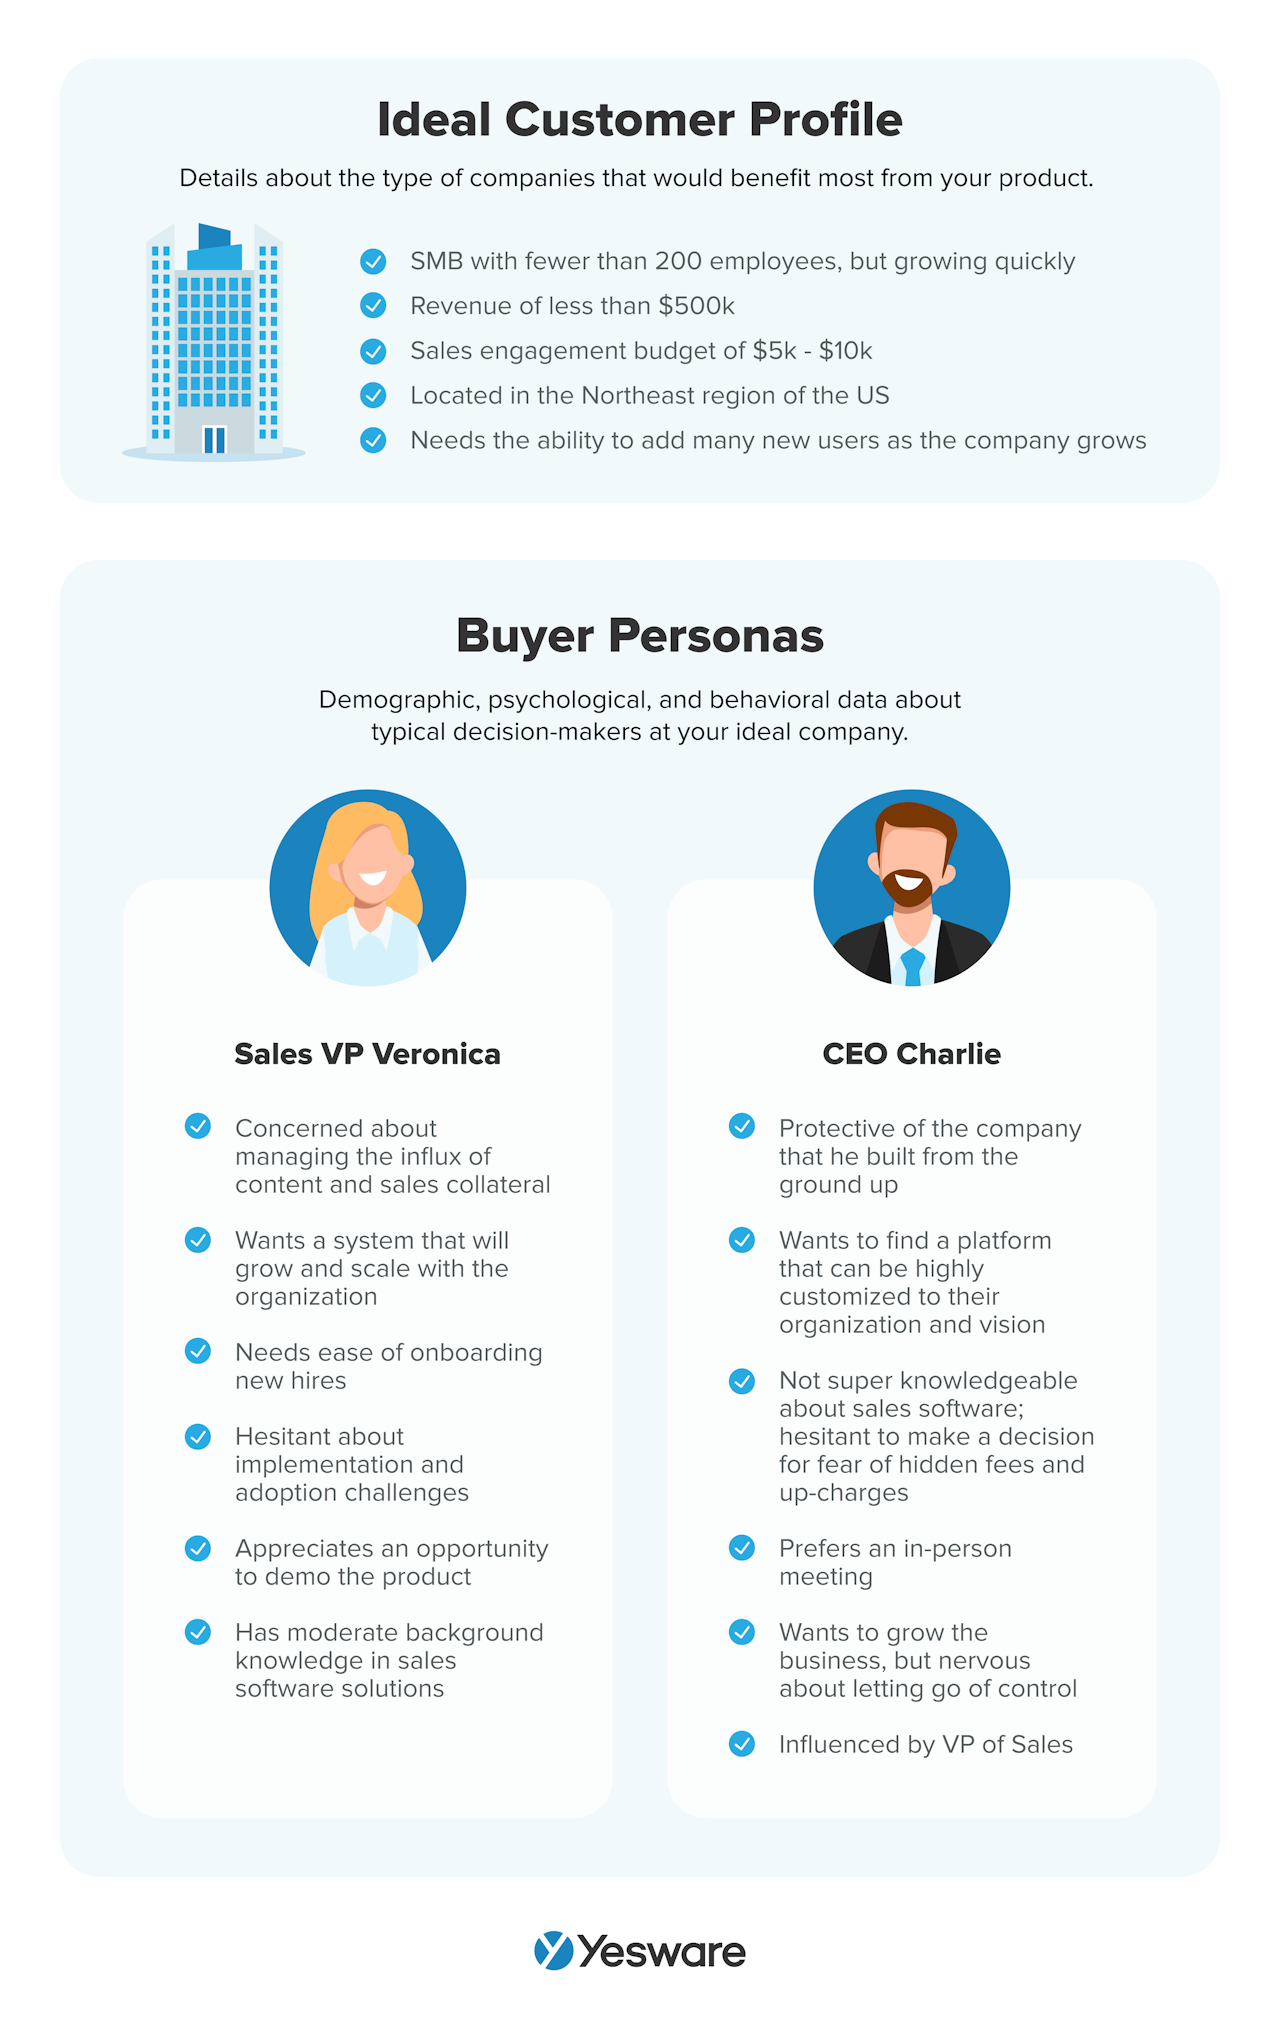 inbound vs outbound sales: ICP and buyer personas